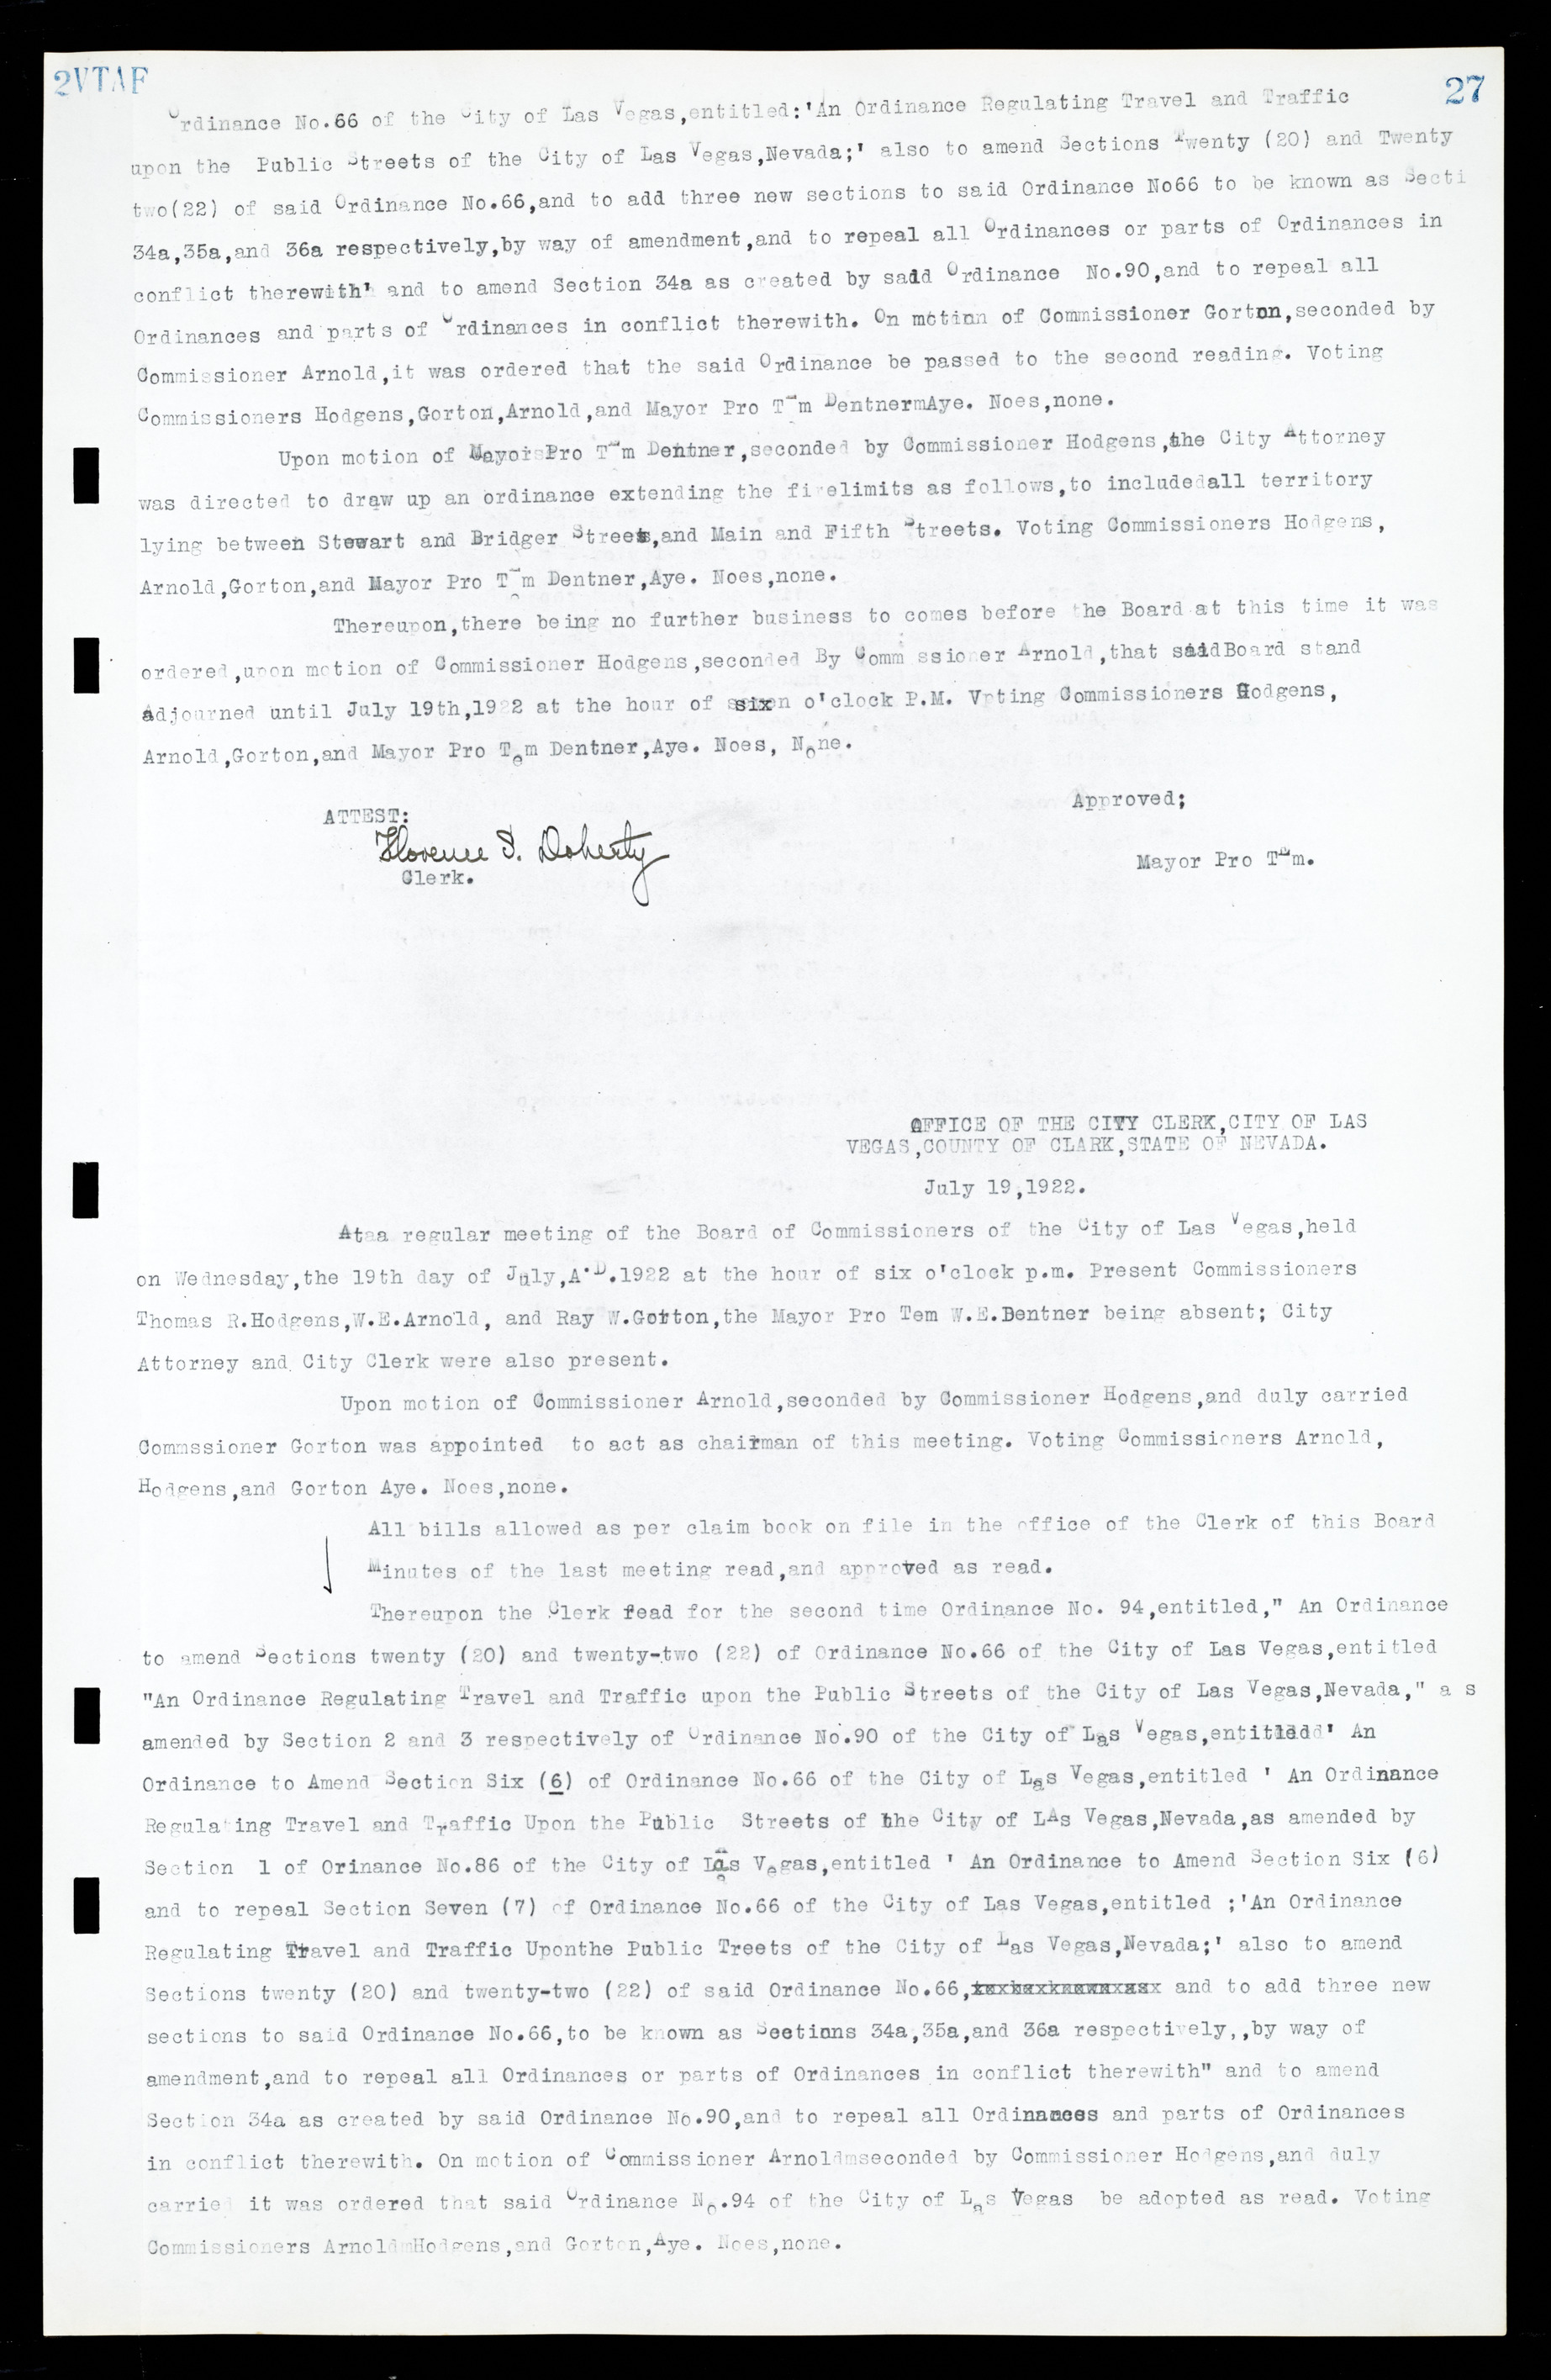 Las Vegas City Commission Minutes, March 1, 1922 to May 10, 1929, lvc000002-34